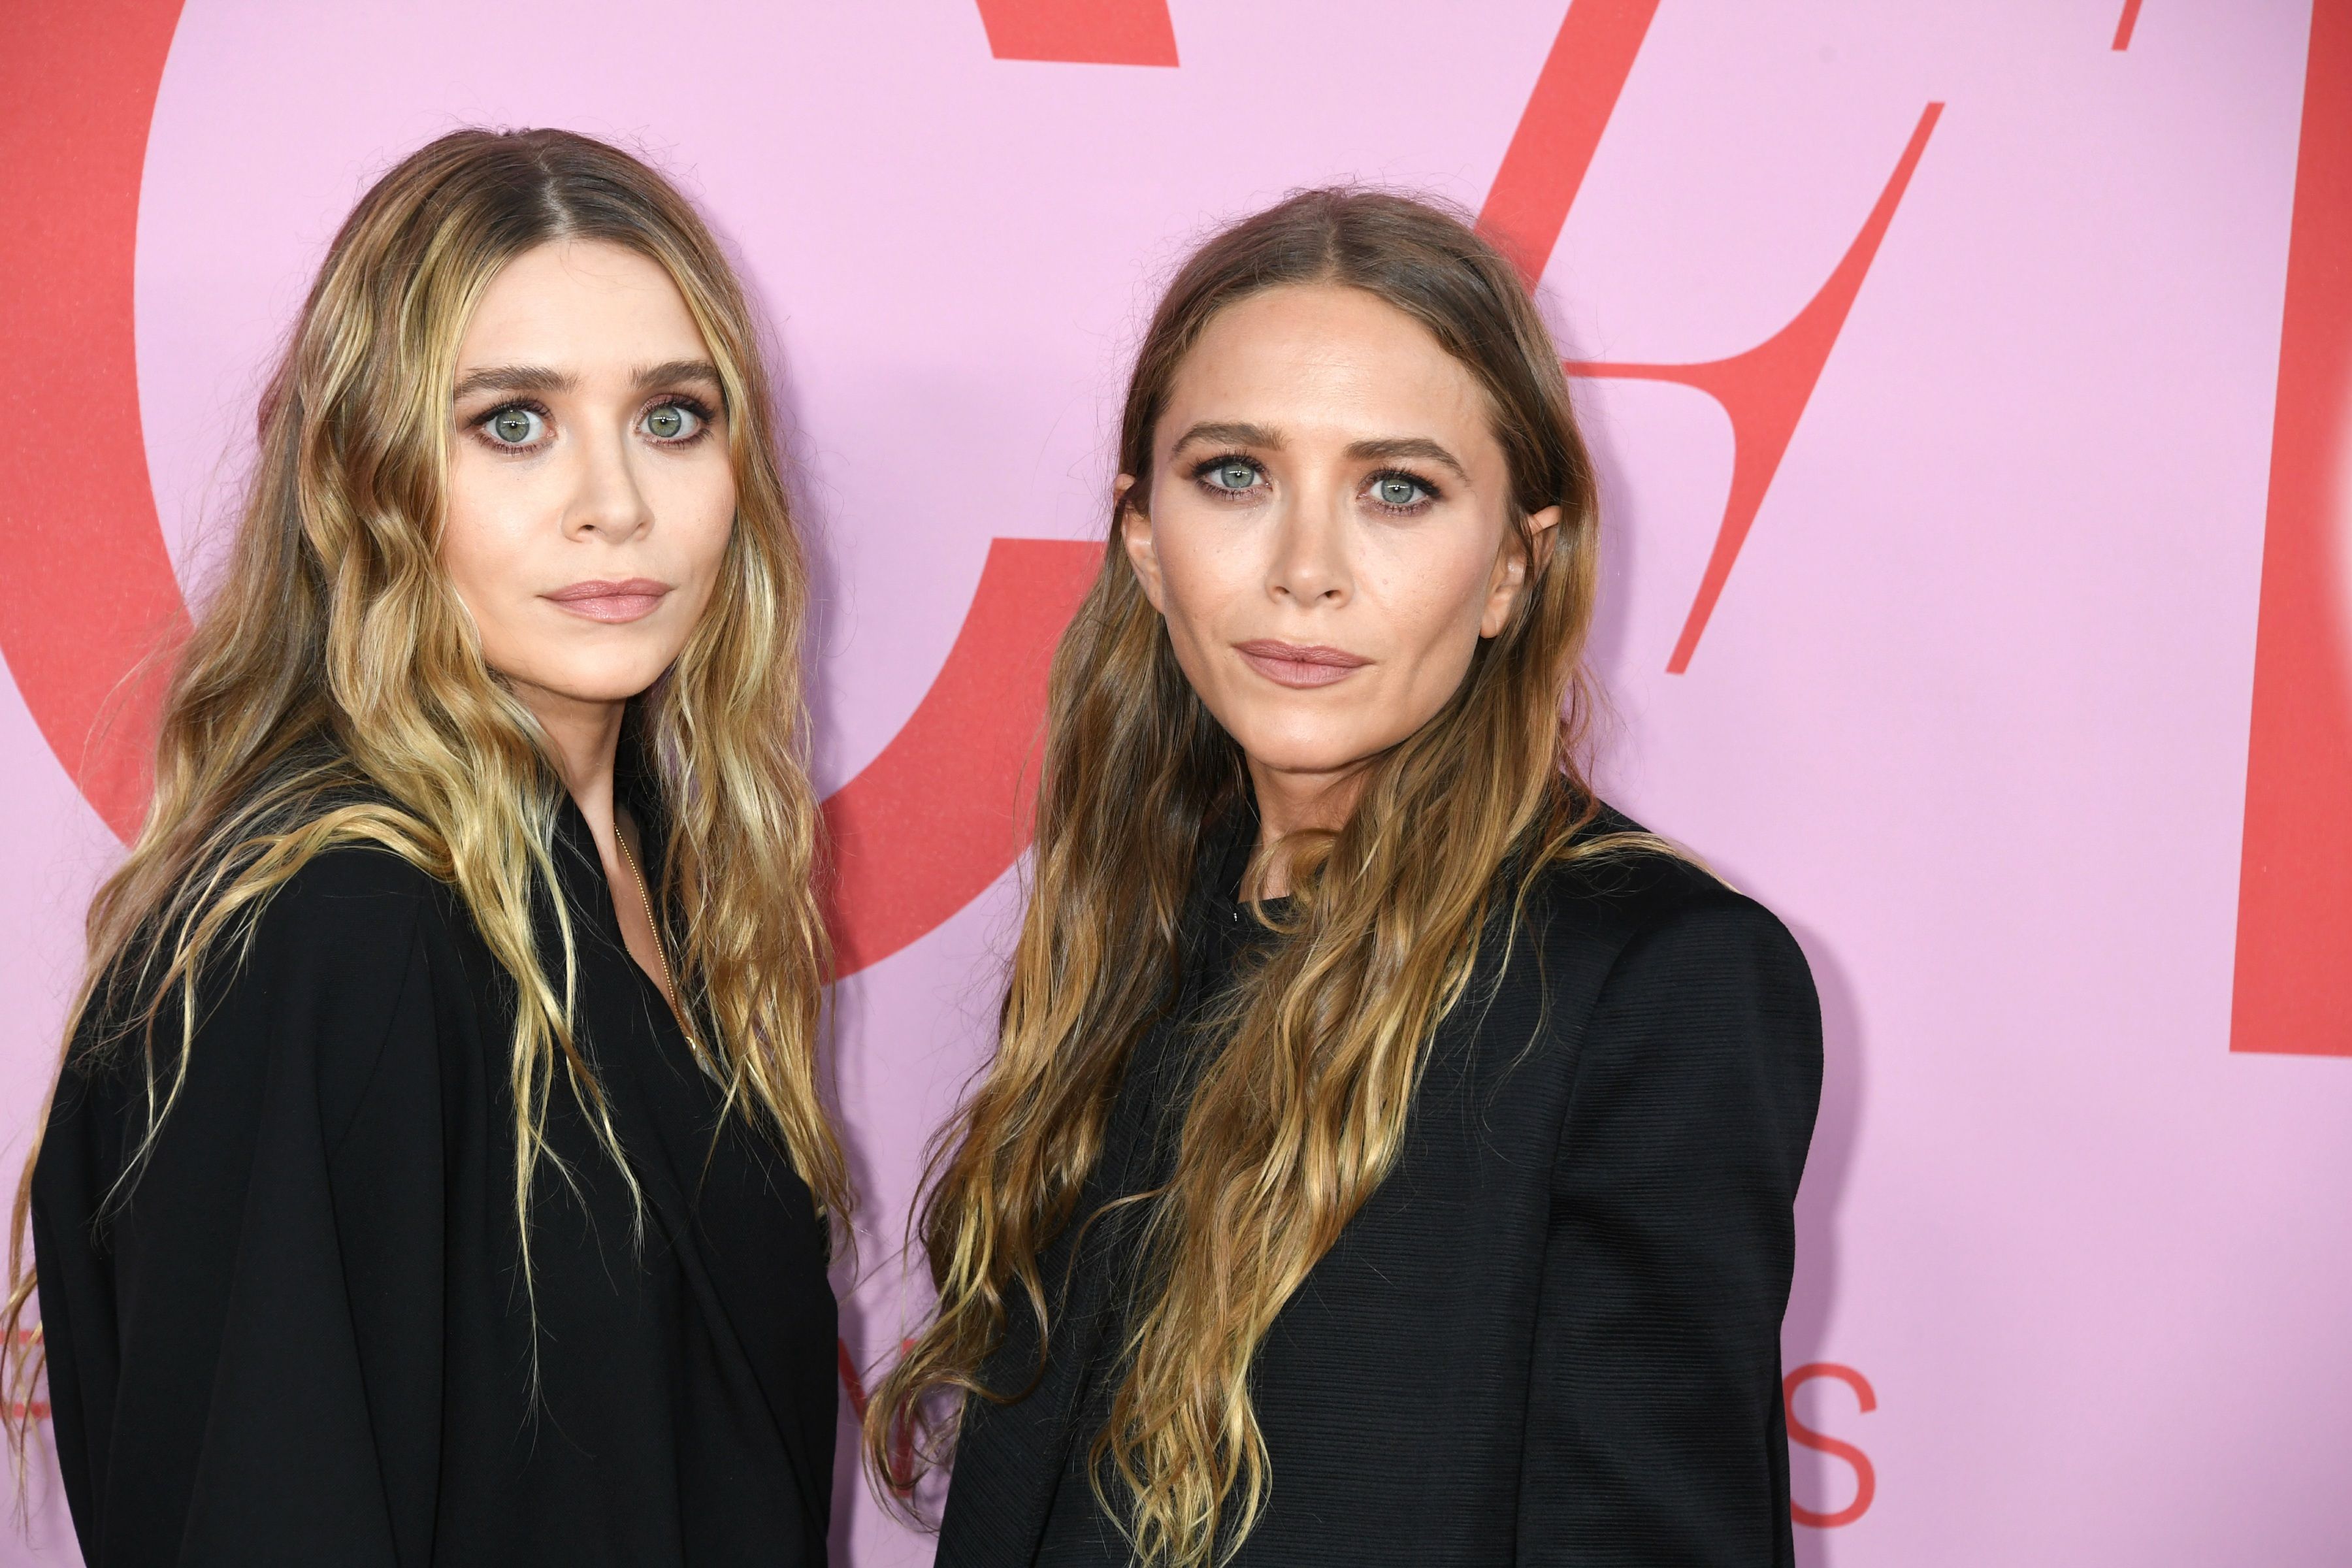 What Happened Between Megan Fox And The Olsen Twins?